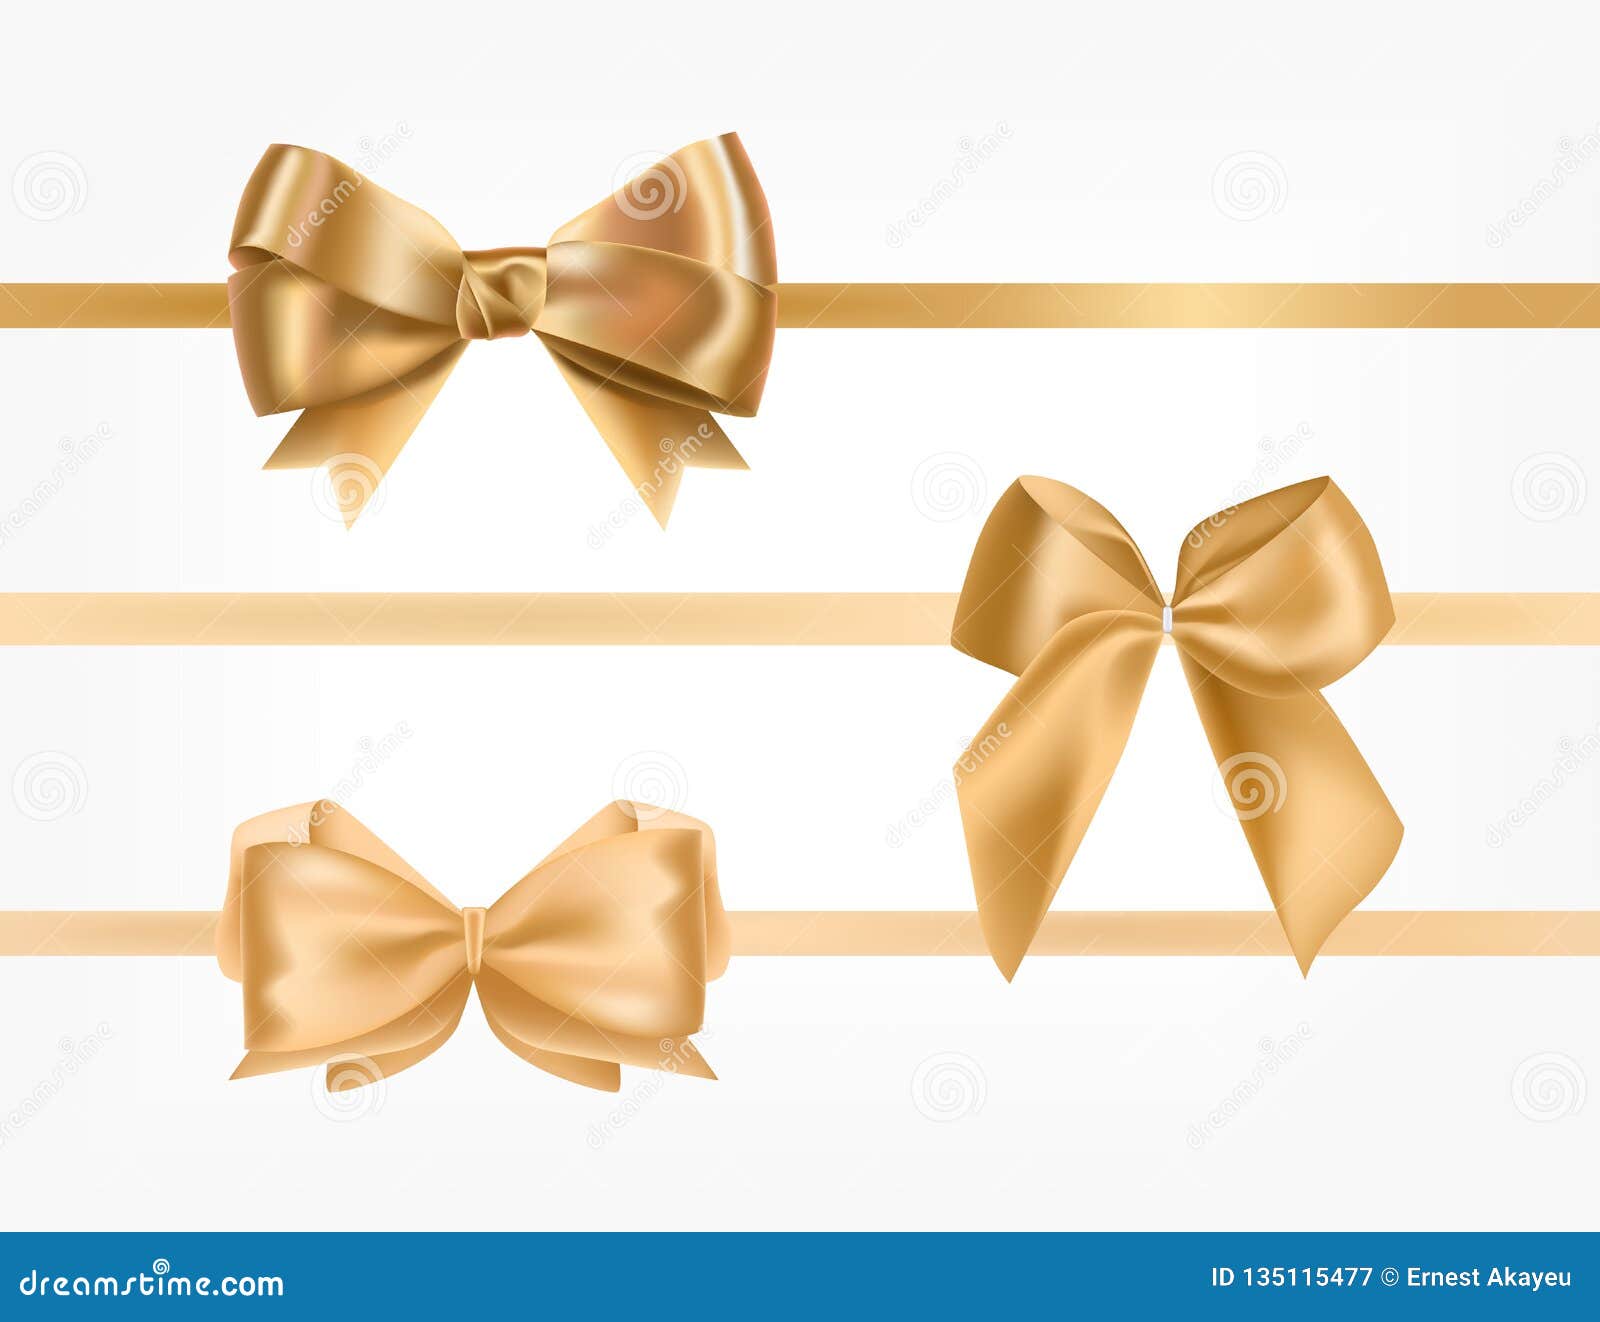 Bundle Of Golden Satin Ribbons Decorated With Bows Collection Of Fancy Decorative Design